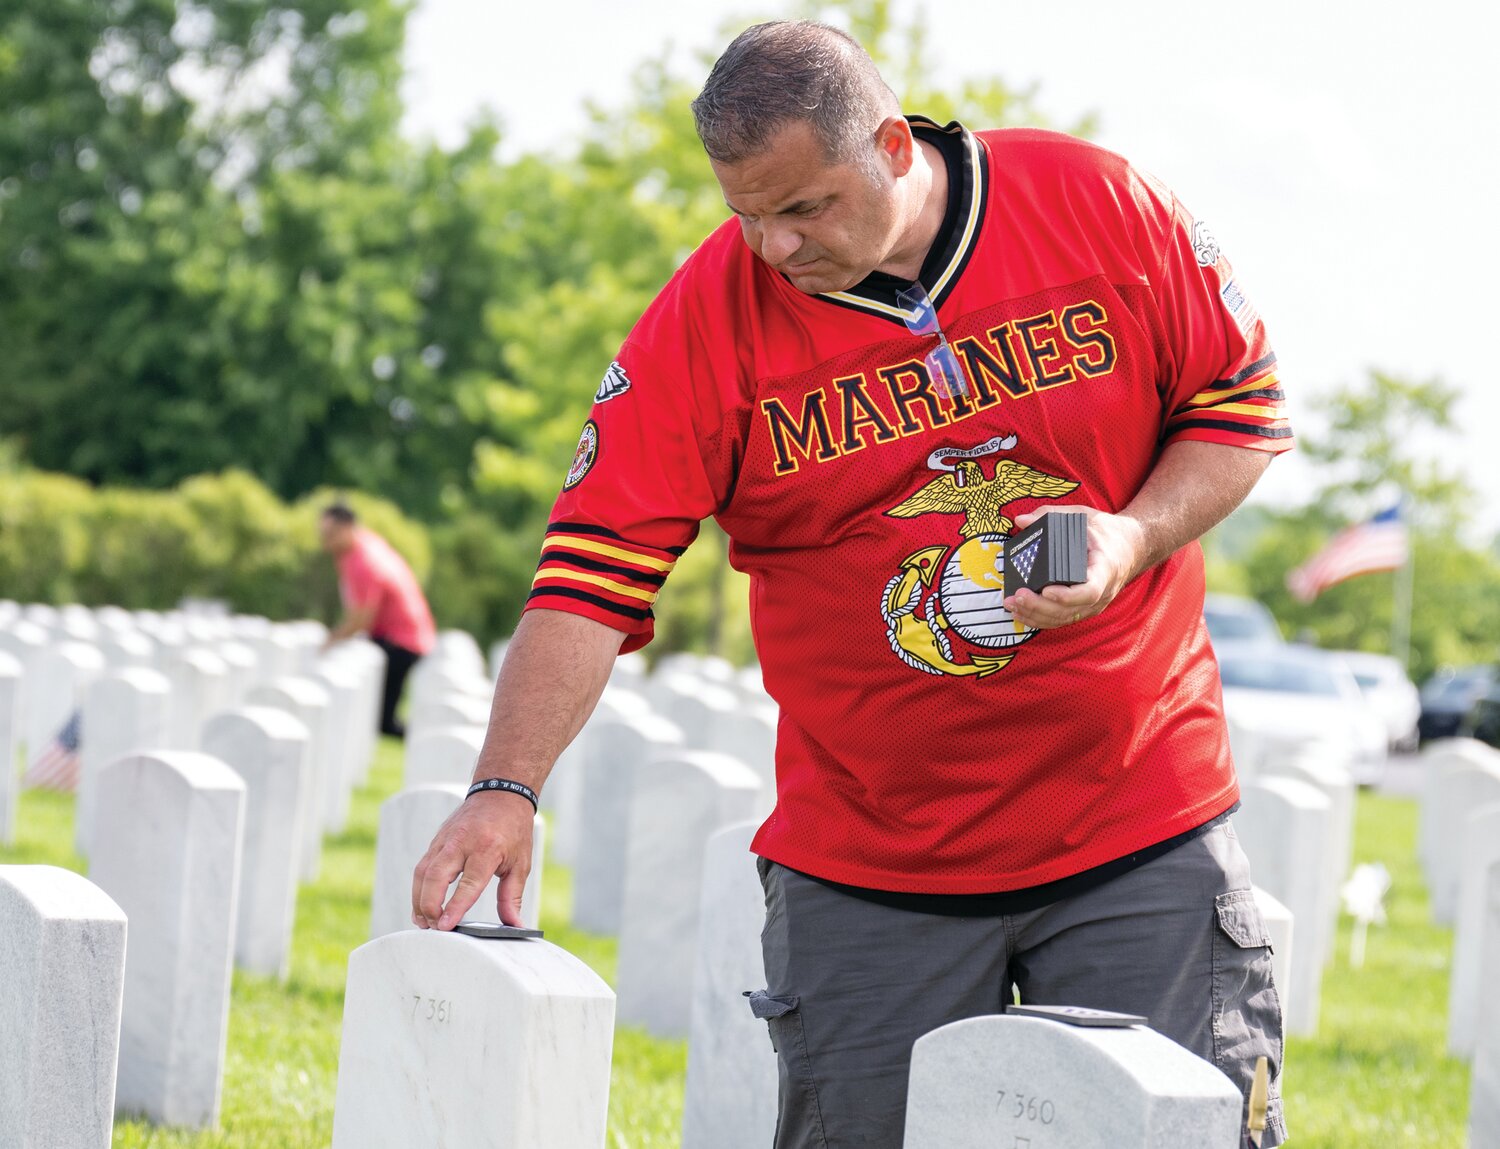 A volunteer participating in The Honor Project places a commemorative token on the gravestone at Washington Crossing National Cemetery.